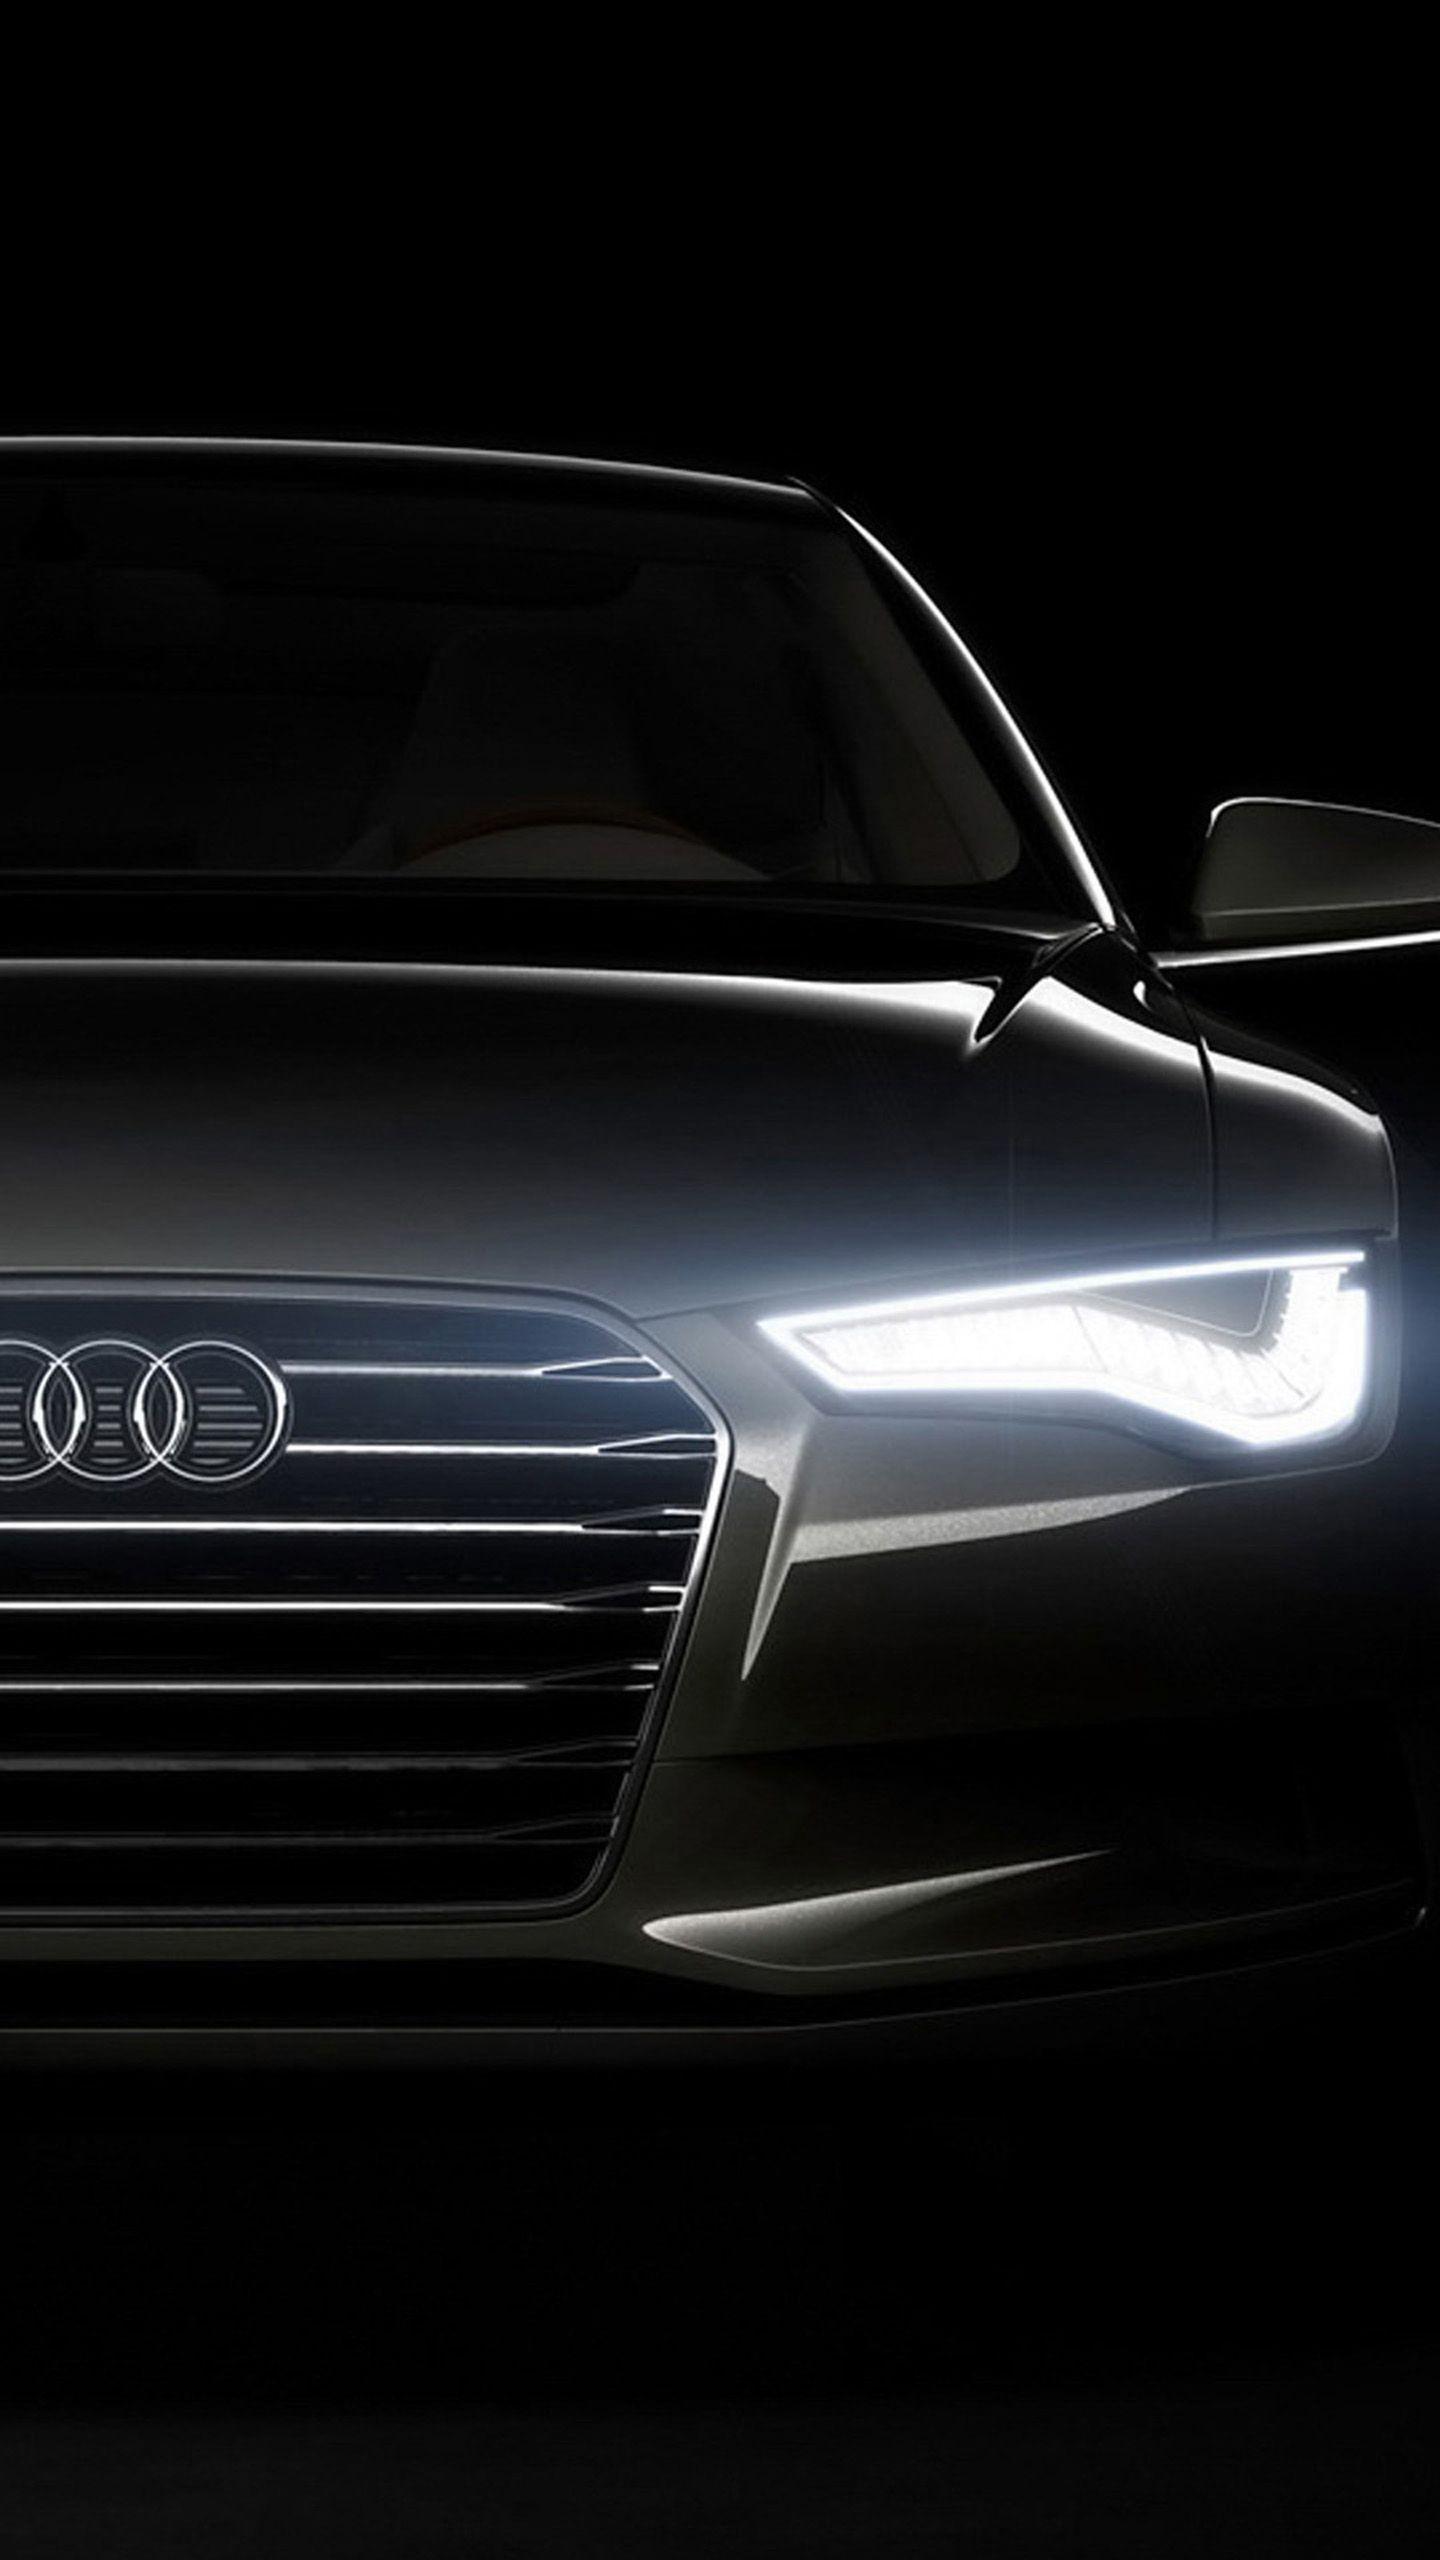 Wallpaper Samsung Galaxy S6 Audi A7 Awesome x 2560